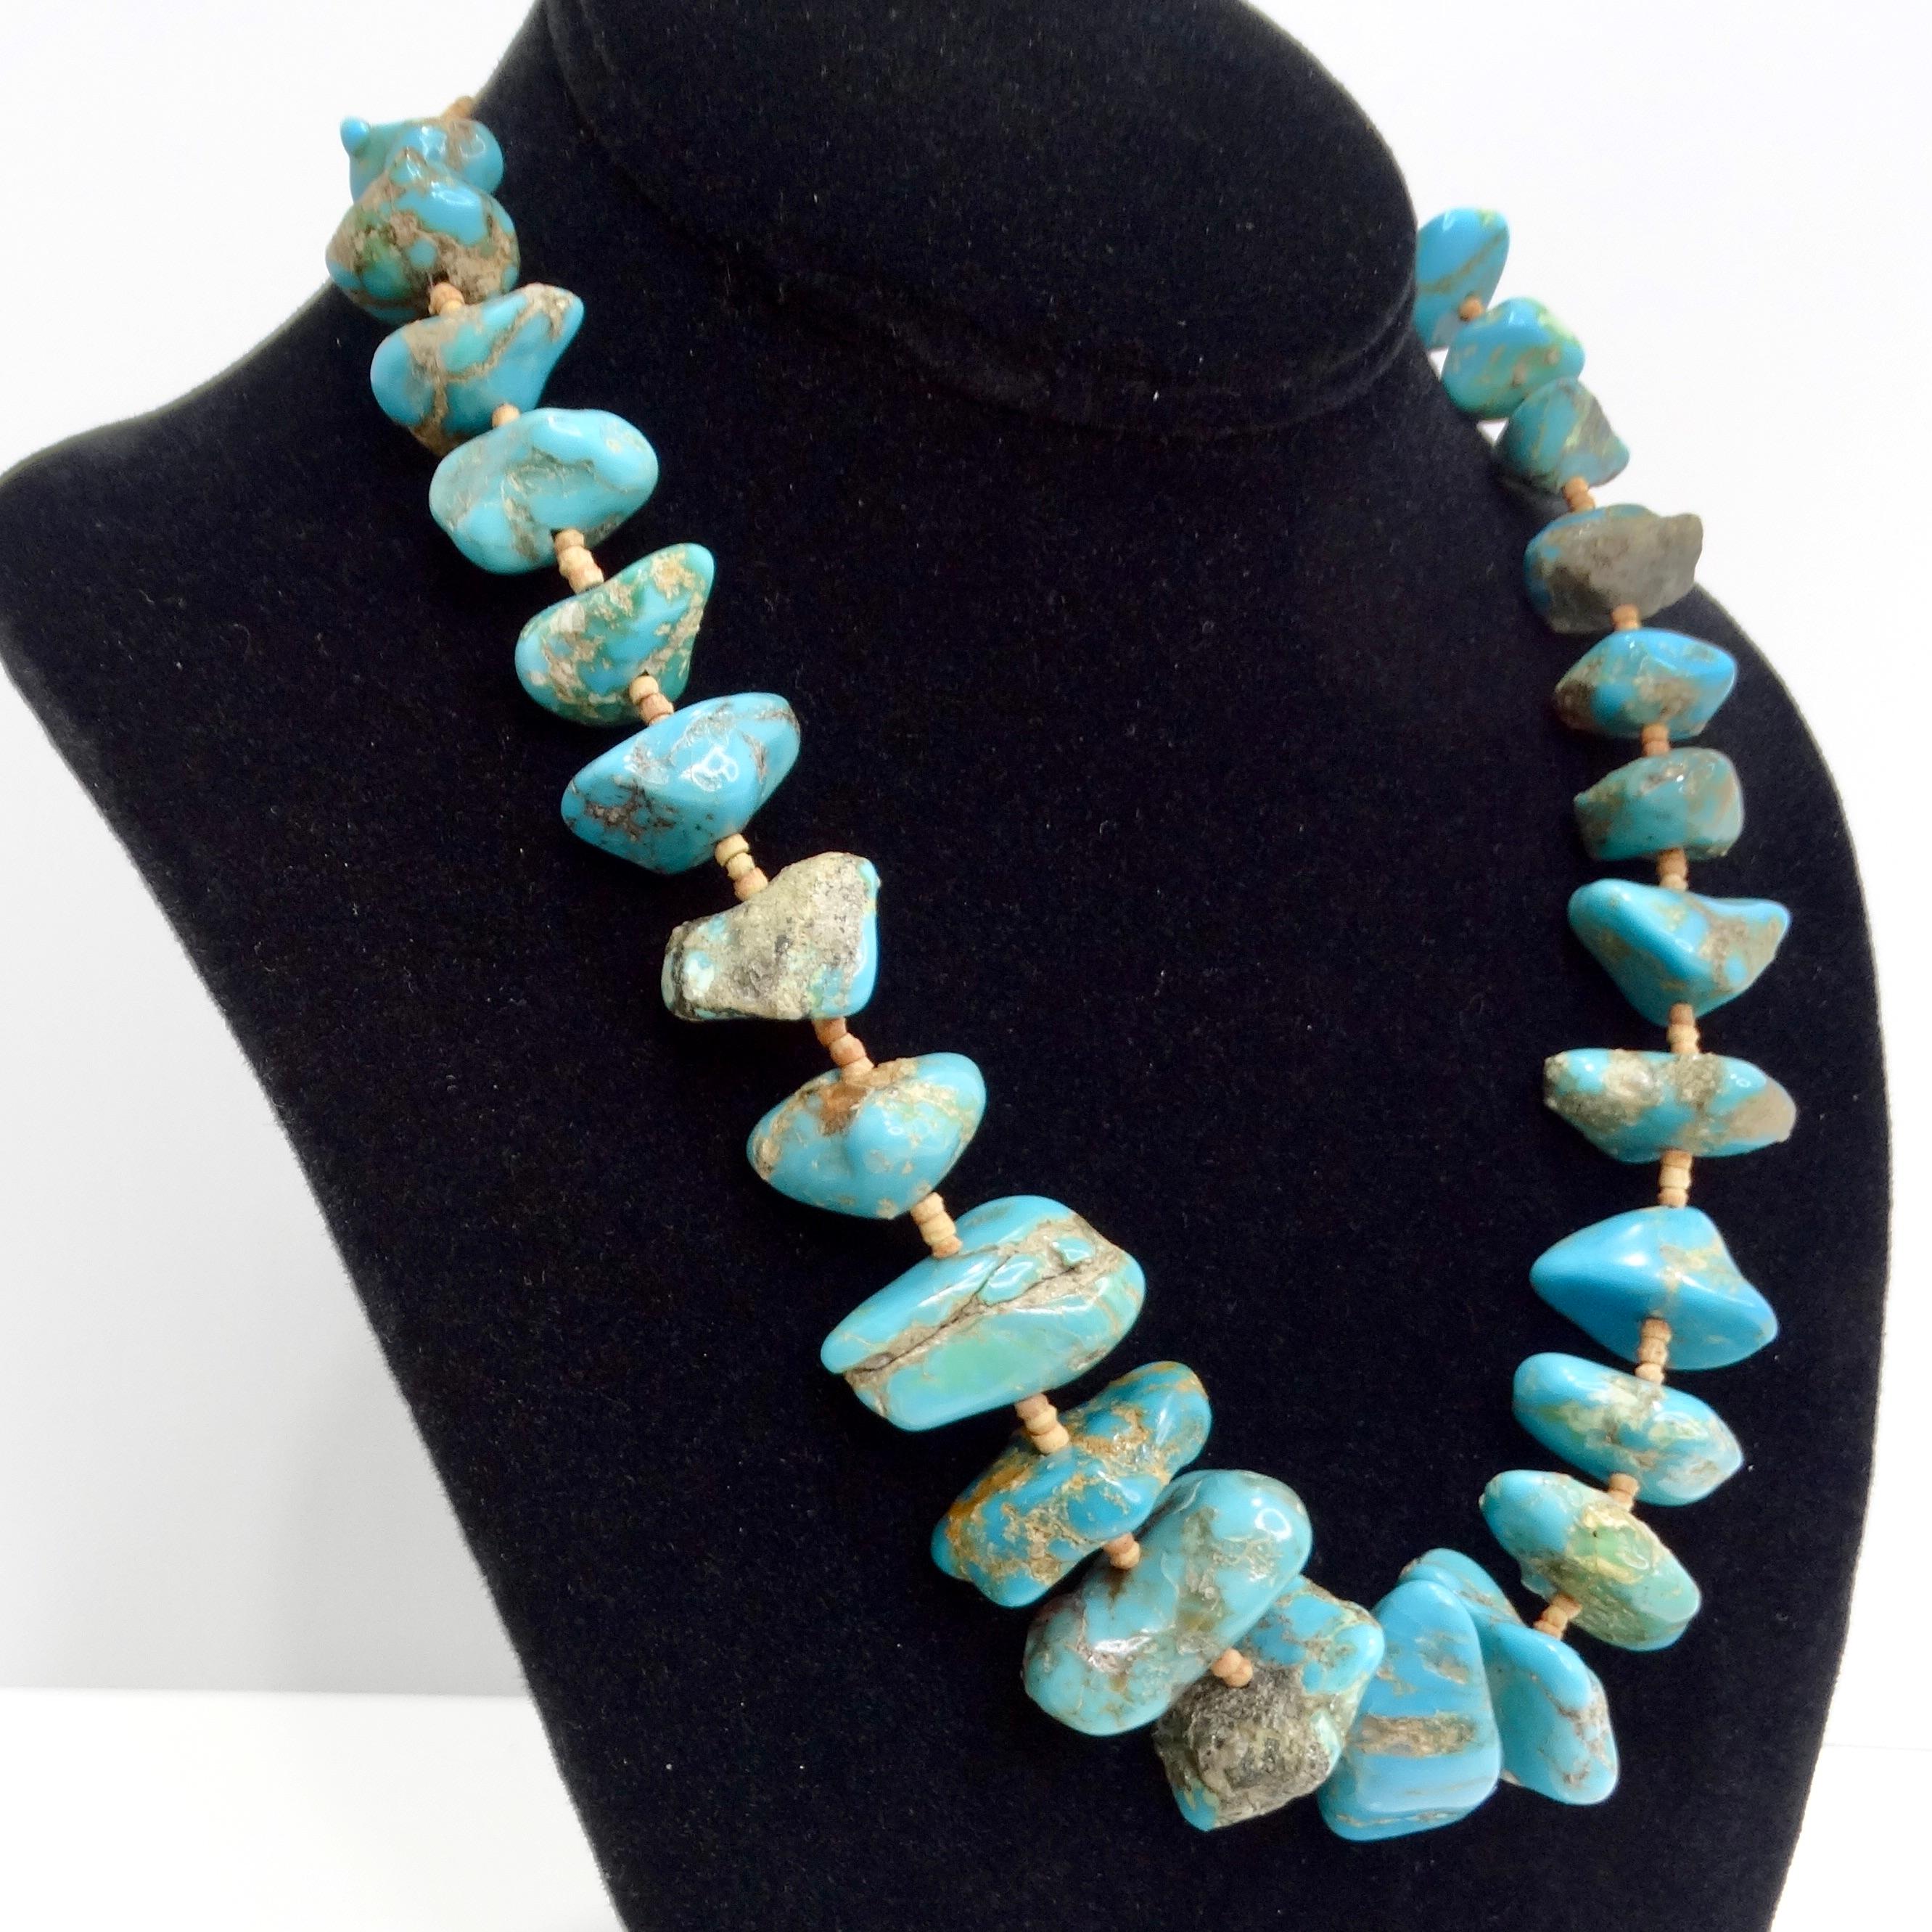 Introducing the 1960s Navajo Turquoise Necklace, a striking vintage piece that captures the essence of Navajo craftsmanship and bold Southwestern style. This beautiful necklace features vibrant blue turquoise stones, each with unique patterns and